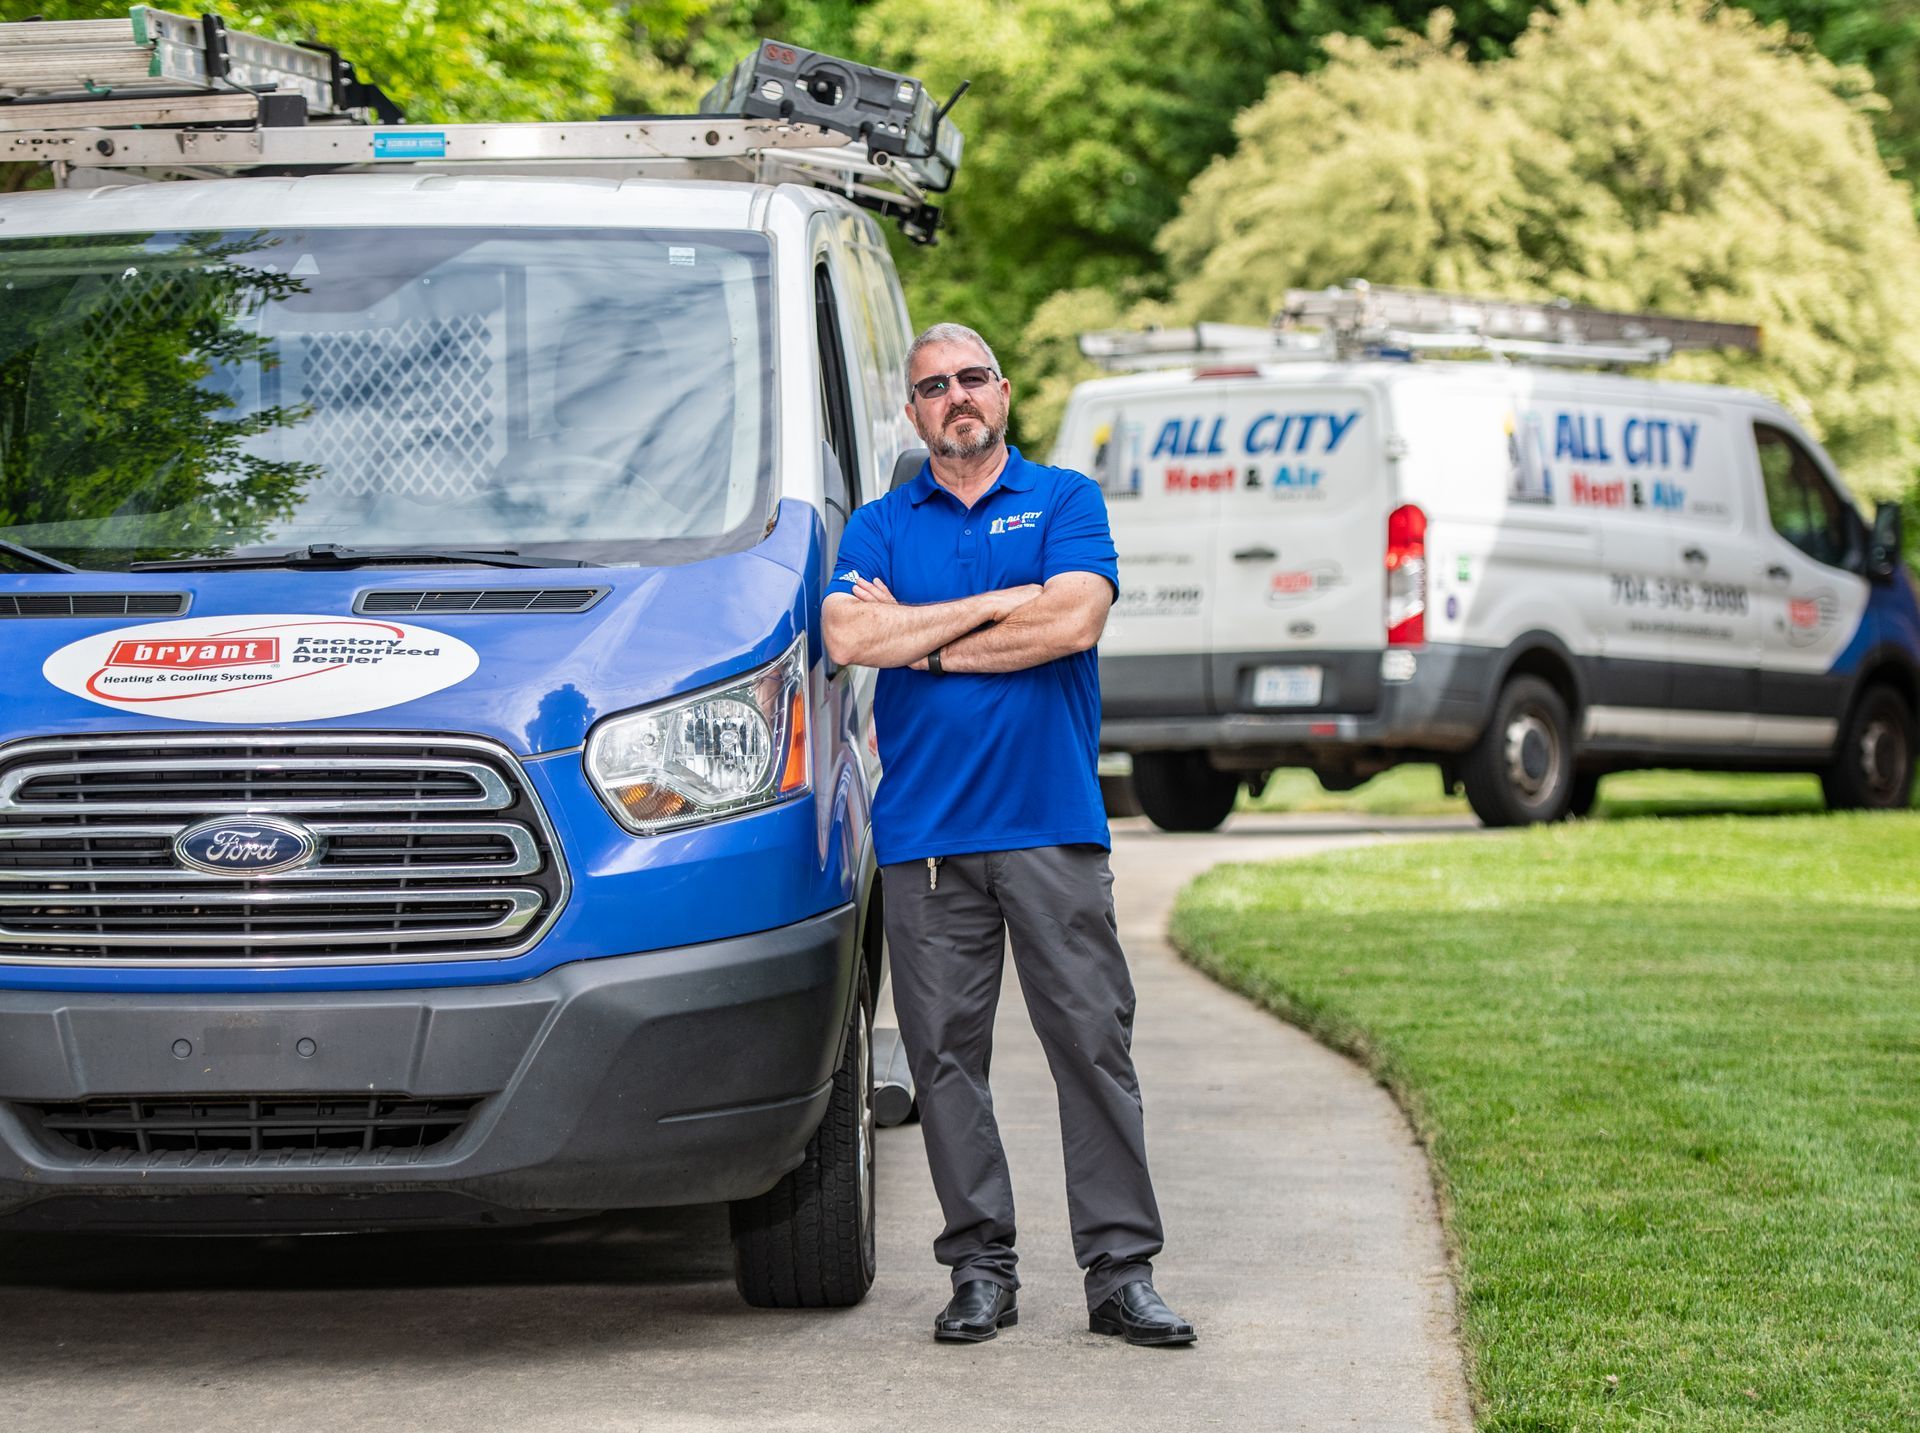 An All City Heat and Air technician is standing in front of two All City Heat and Air vans.